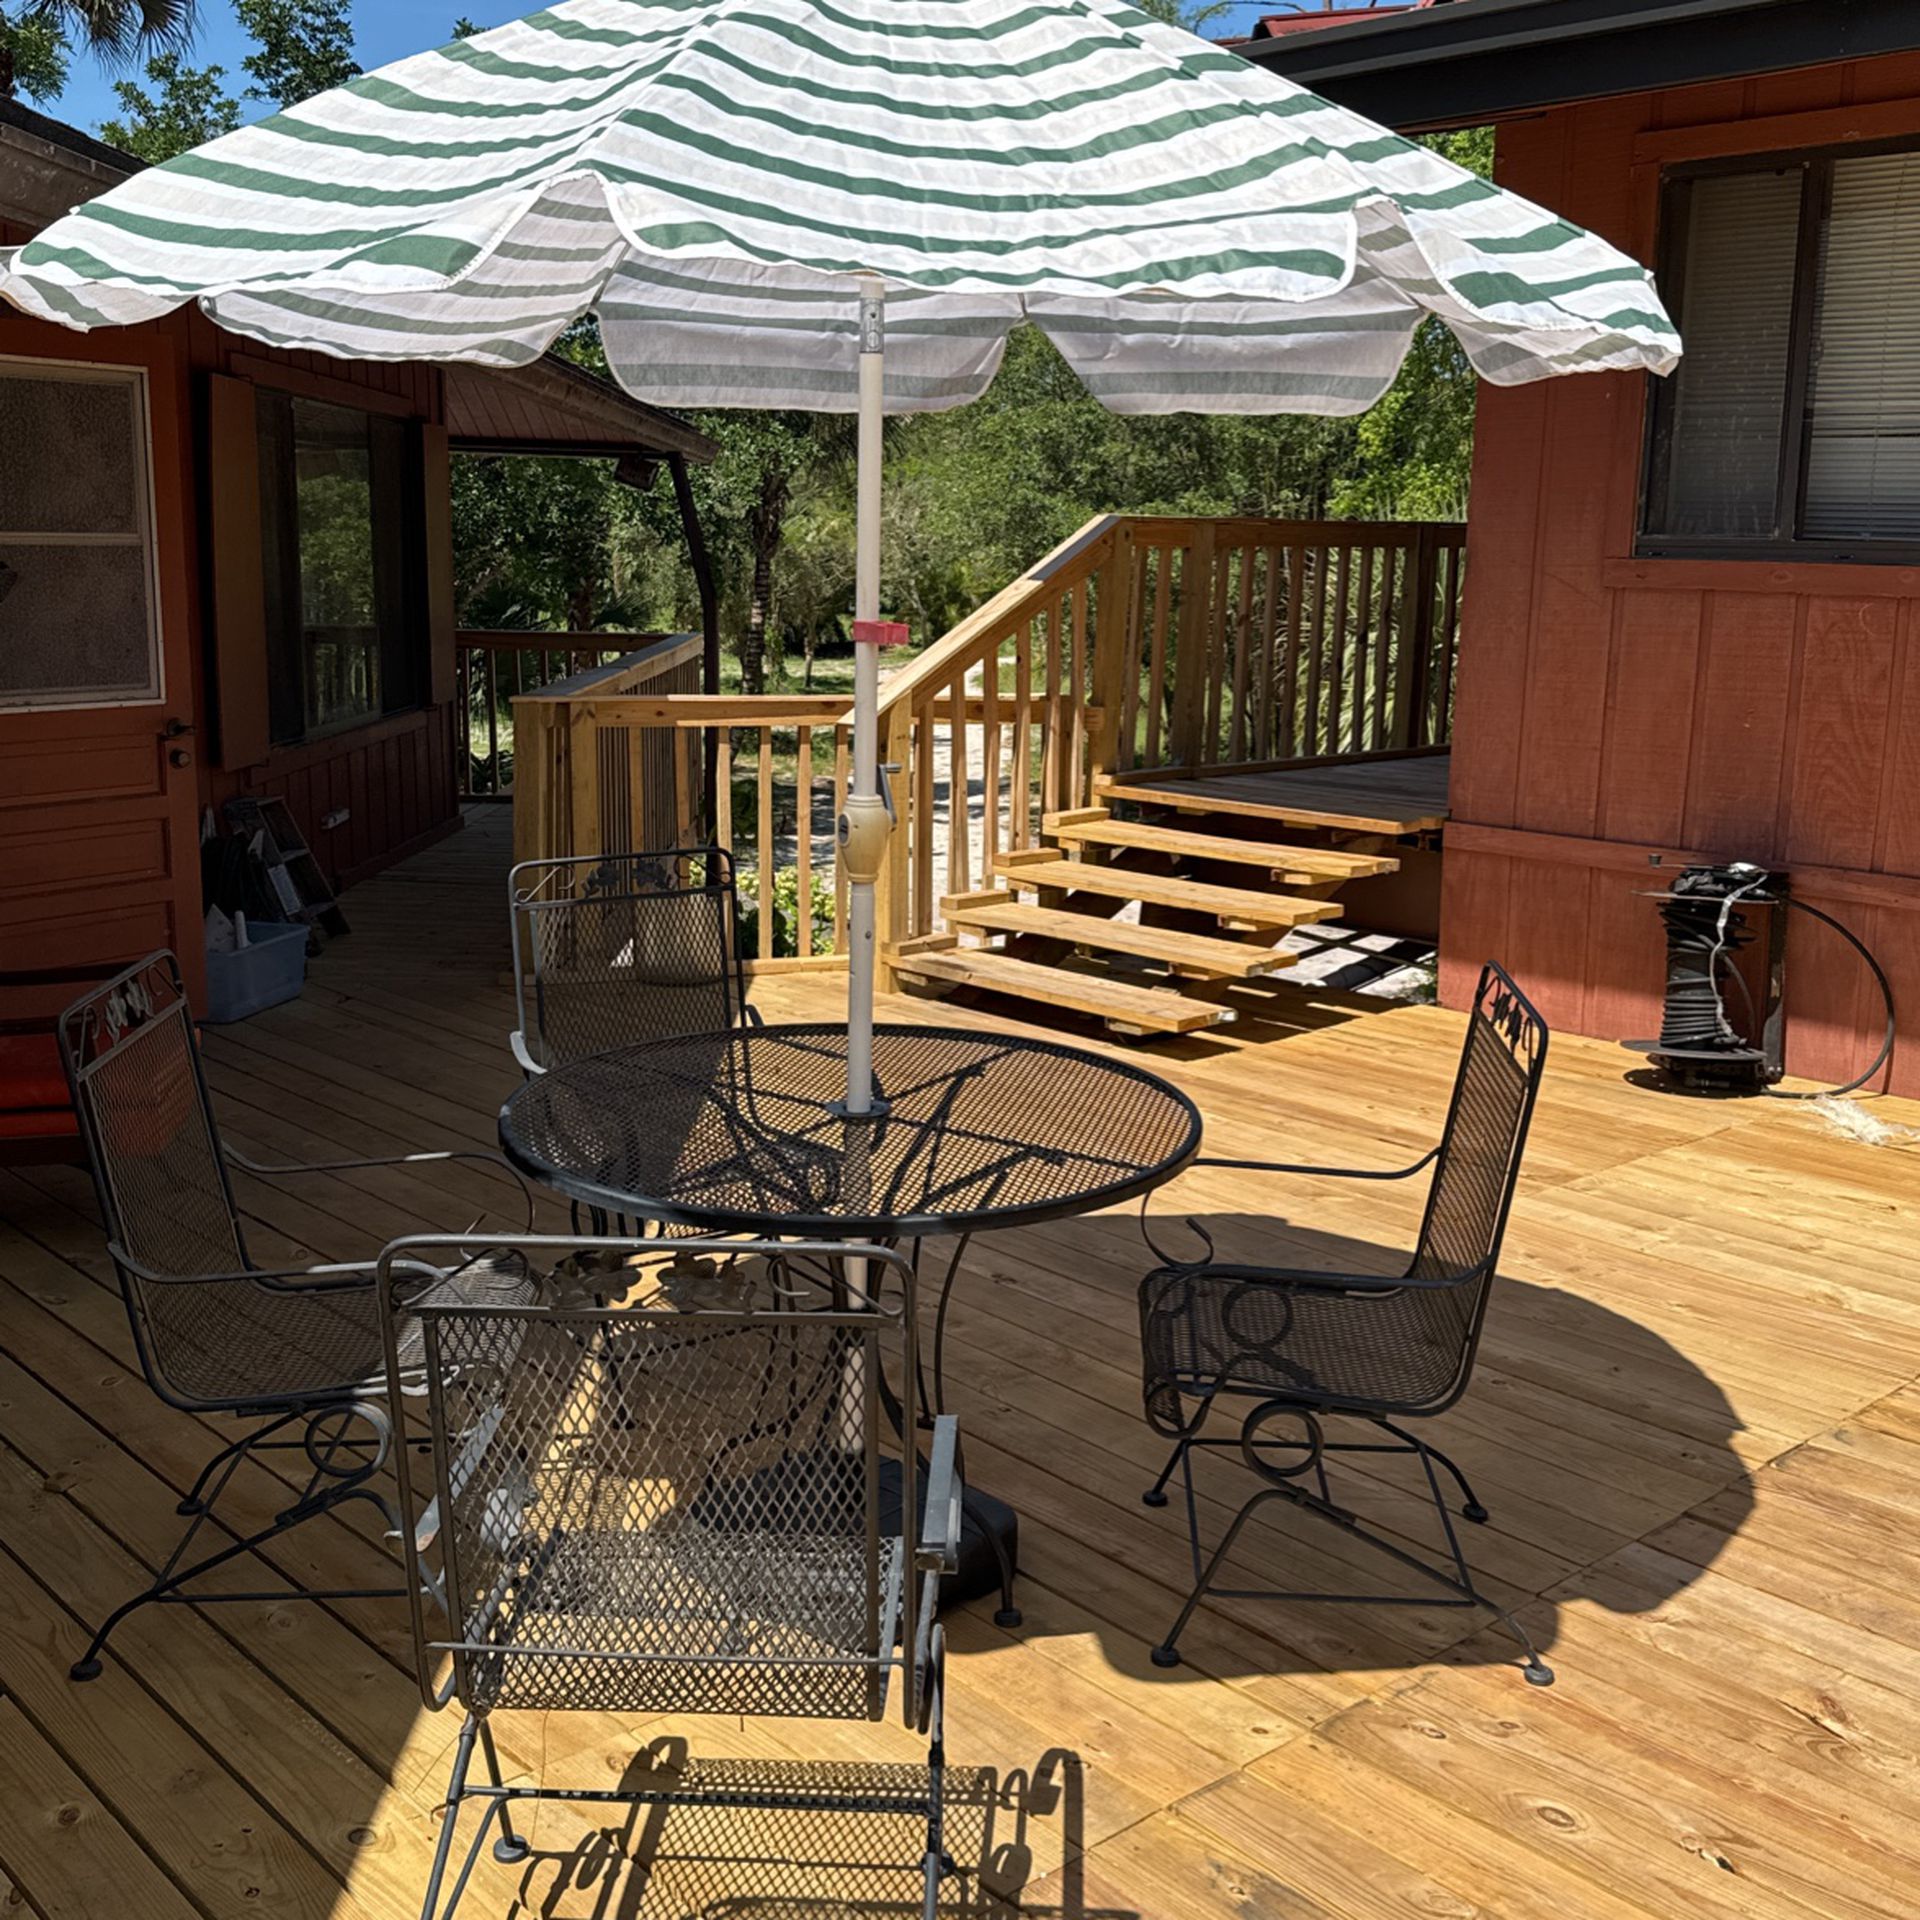 Patio furniture/ metal table with 2 chairs and umbrella